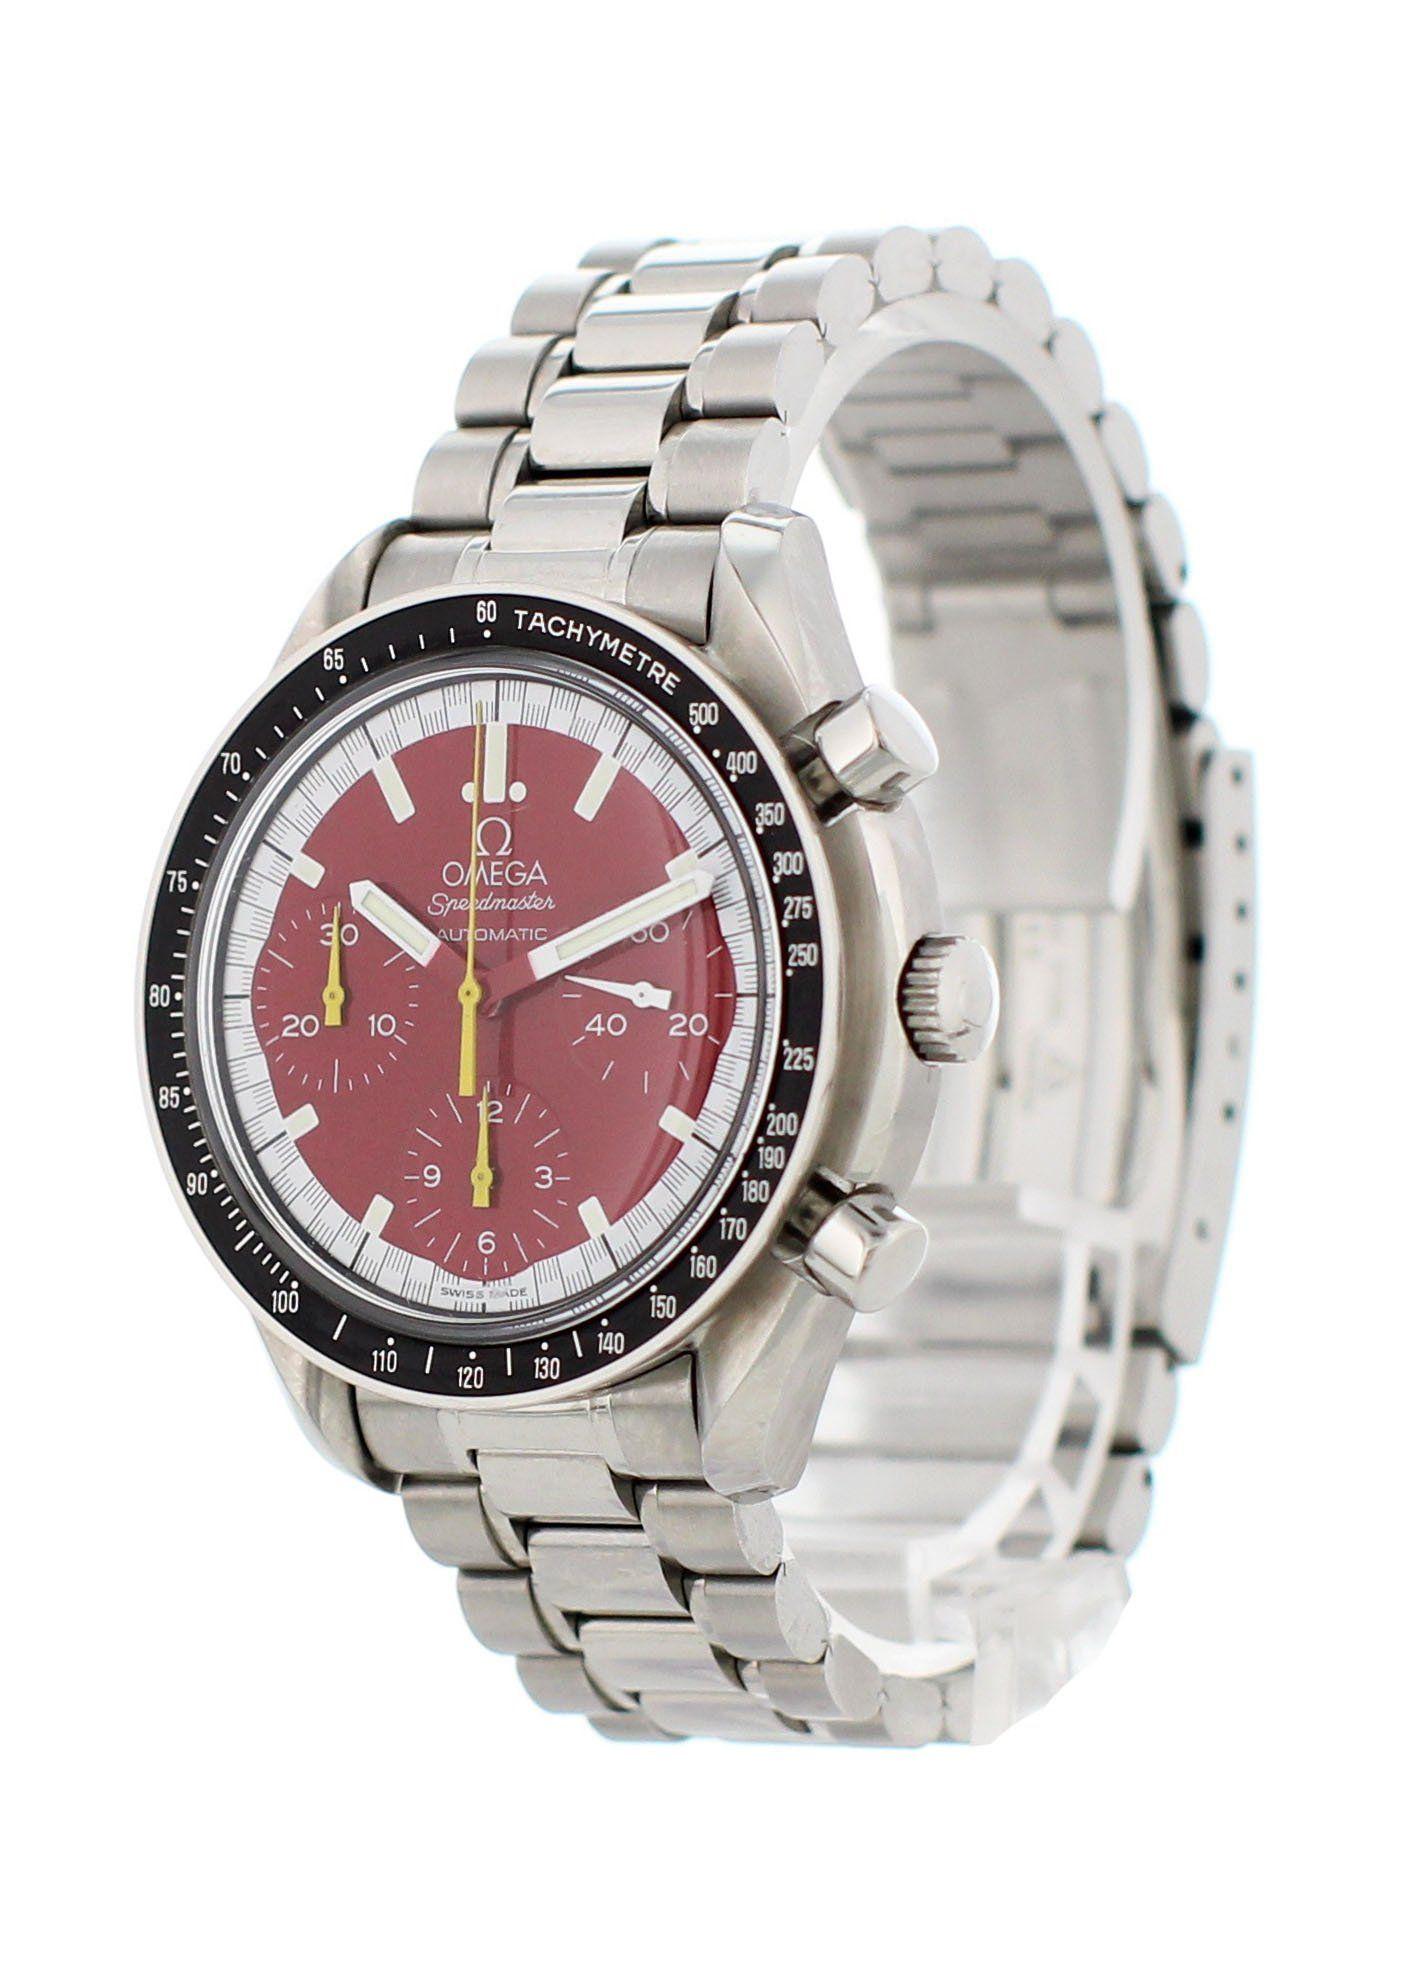 Omega Speedmaster Michael Schumacher 3510.61.00 Men's Watch
39mm Stainless Steel case. 
Stainless Steel Tachymeter bezel. 
Red dial with luminous white hands and index hour markers. 
Minute markers on the outer dial. 
Stainless Steel Bracelet with